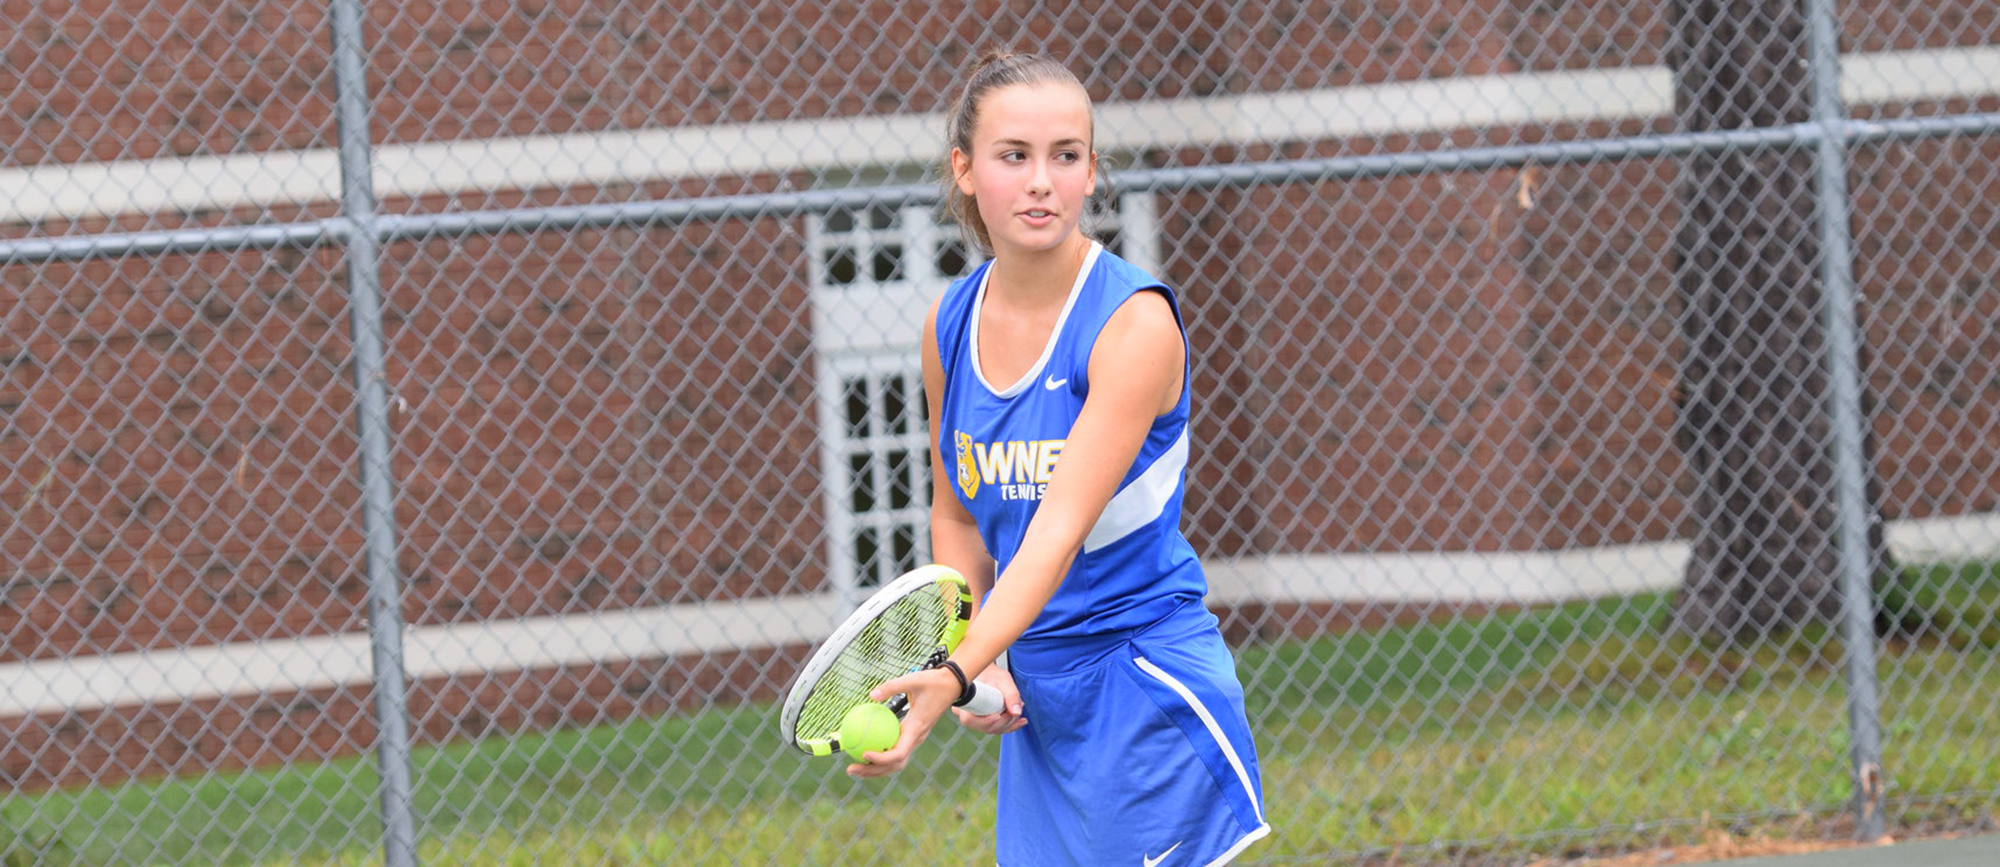 Sydney Lewis registered a 6-1, 6-0 win at No. 5 singles as WNE defeated Curry 5-0 on Wednesday. (Photo by Rachael Margossian)